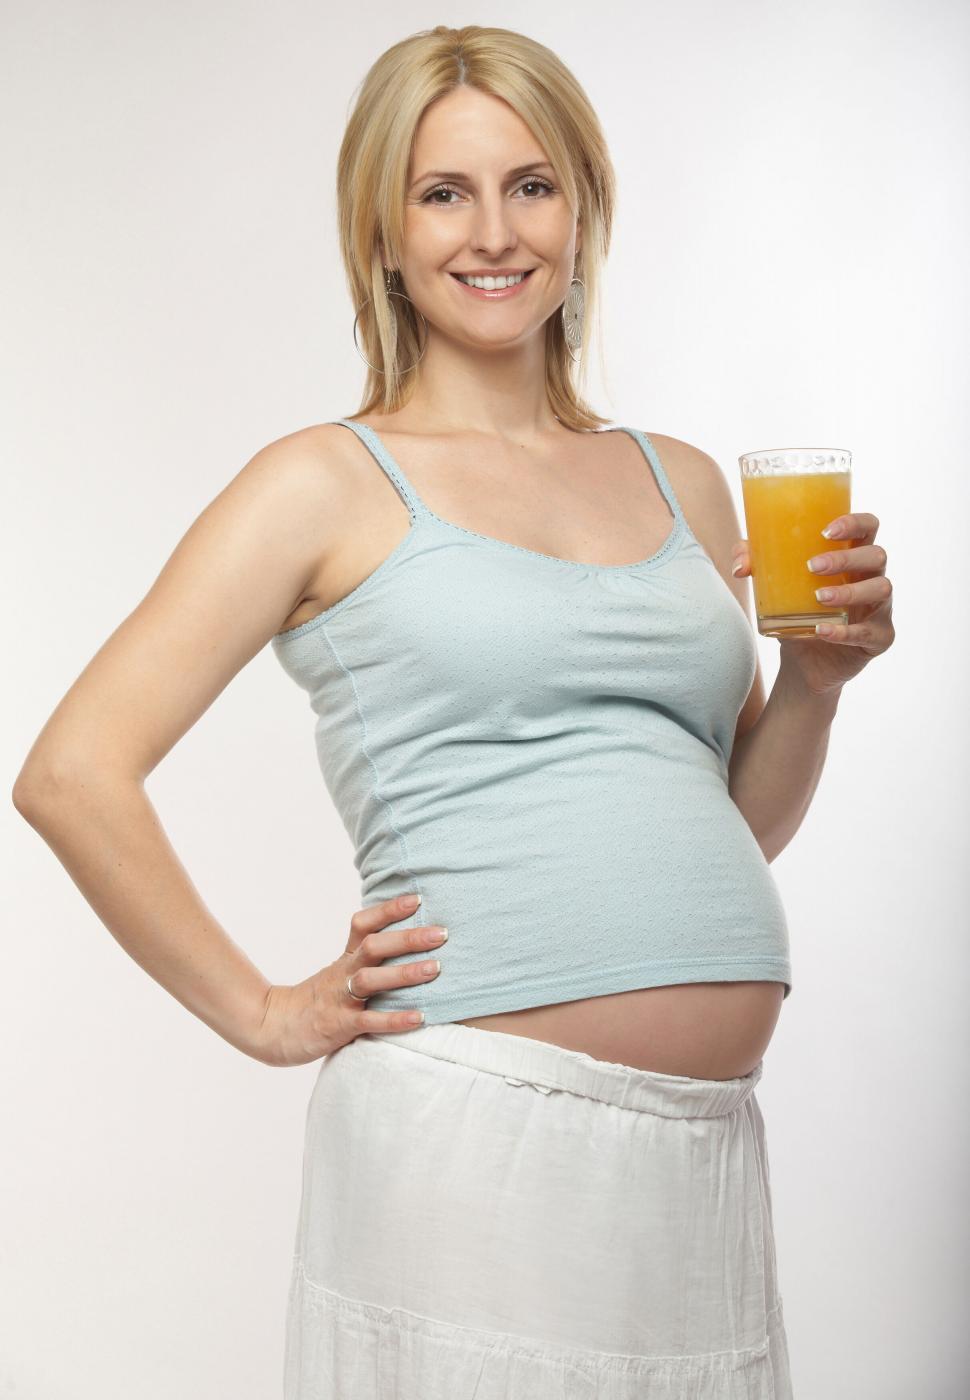 Free Image of Pregnant woman holding a glass of juice 